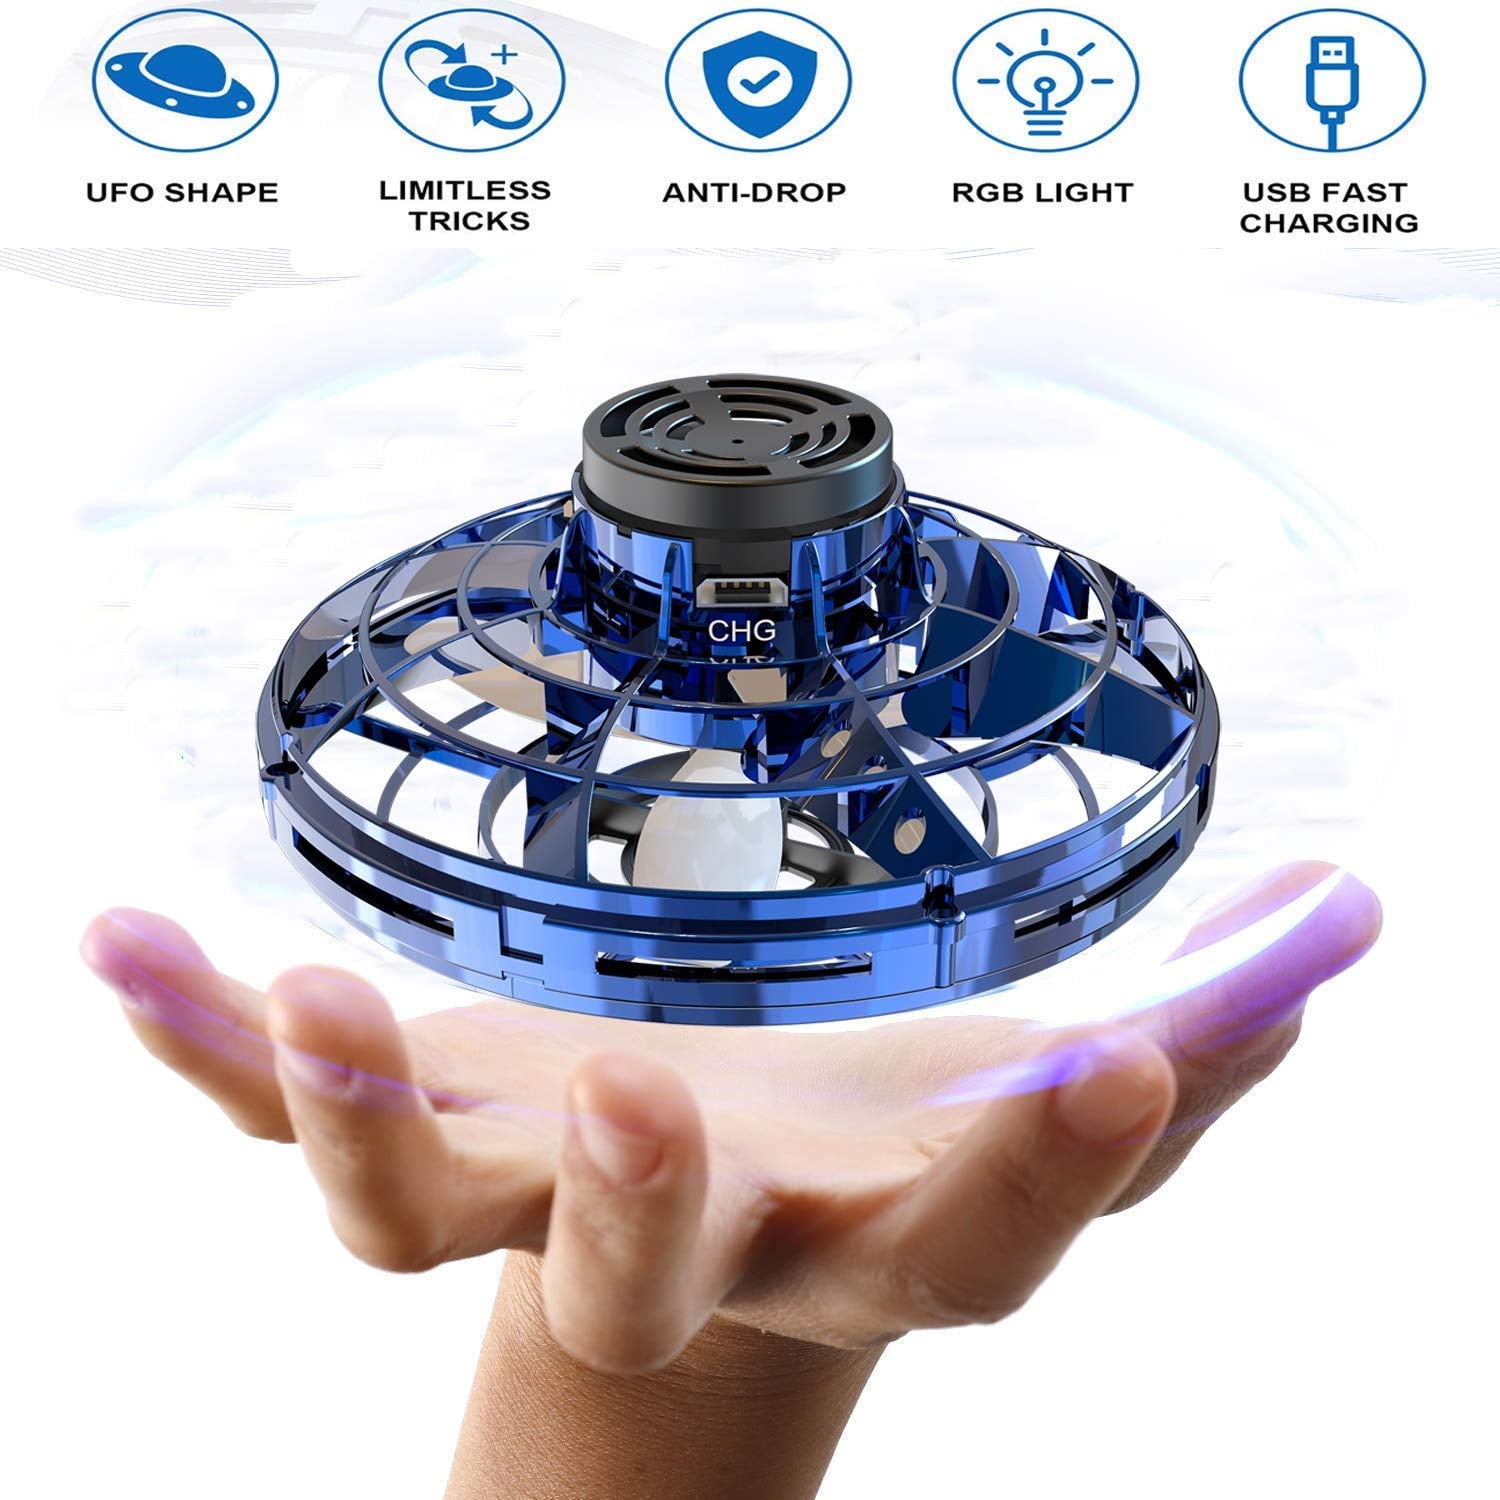 FlyNova Flying Drone Toy Scoot Hands Free Helicopter with 360° Rotating and Shinning LED Lights Hand Controlled Mini Drone for Kids And Adults Flying Aircraft Games Gifts Black USB Charging 